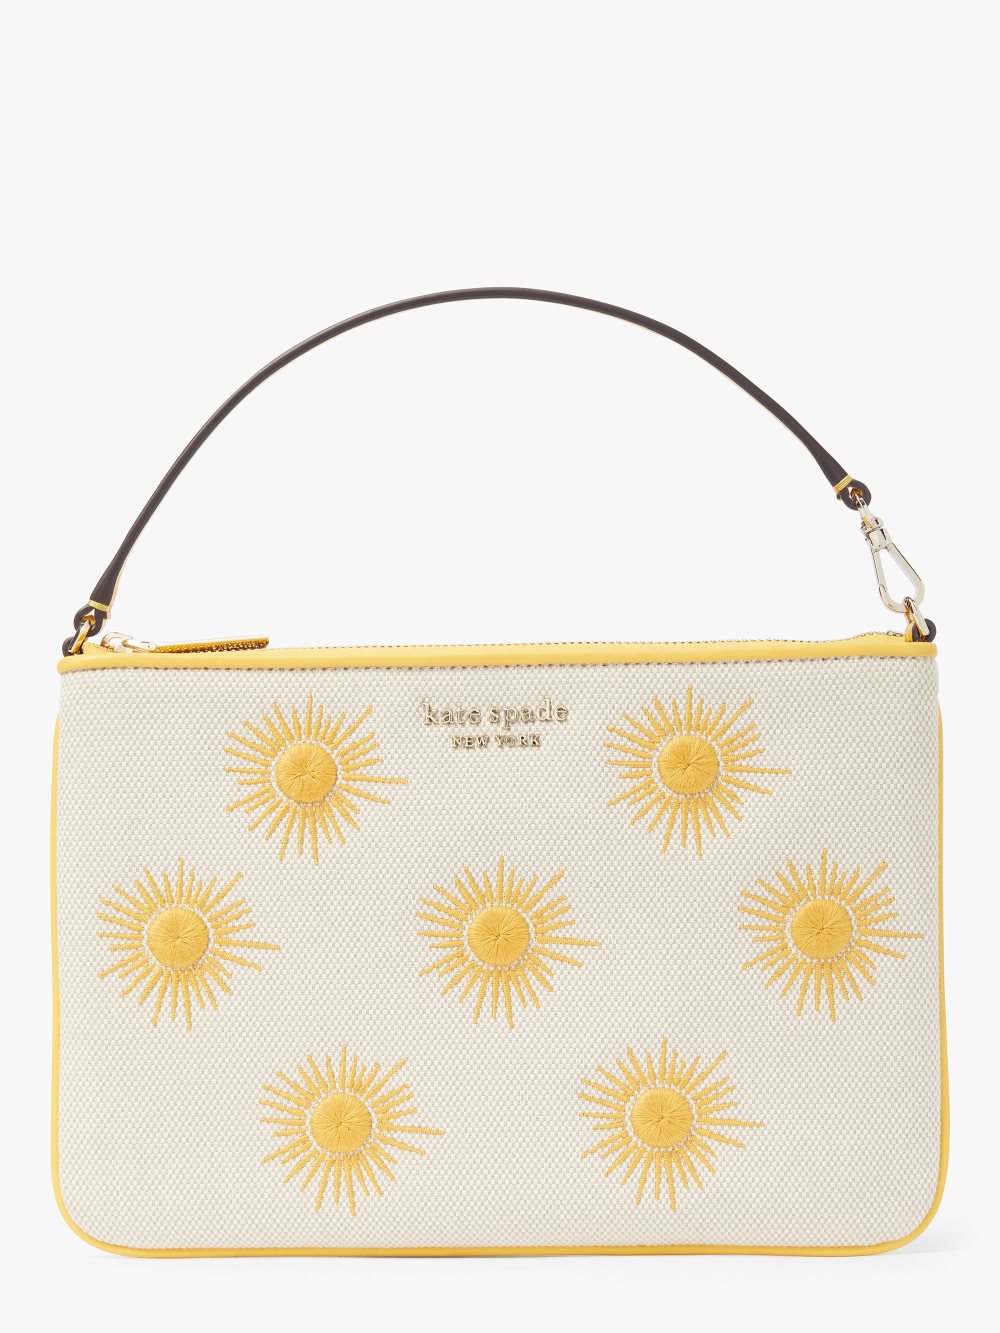 Women's morning light multi sunkiss embroidered canvas sun pouch wristlet | Kate Spade